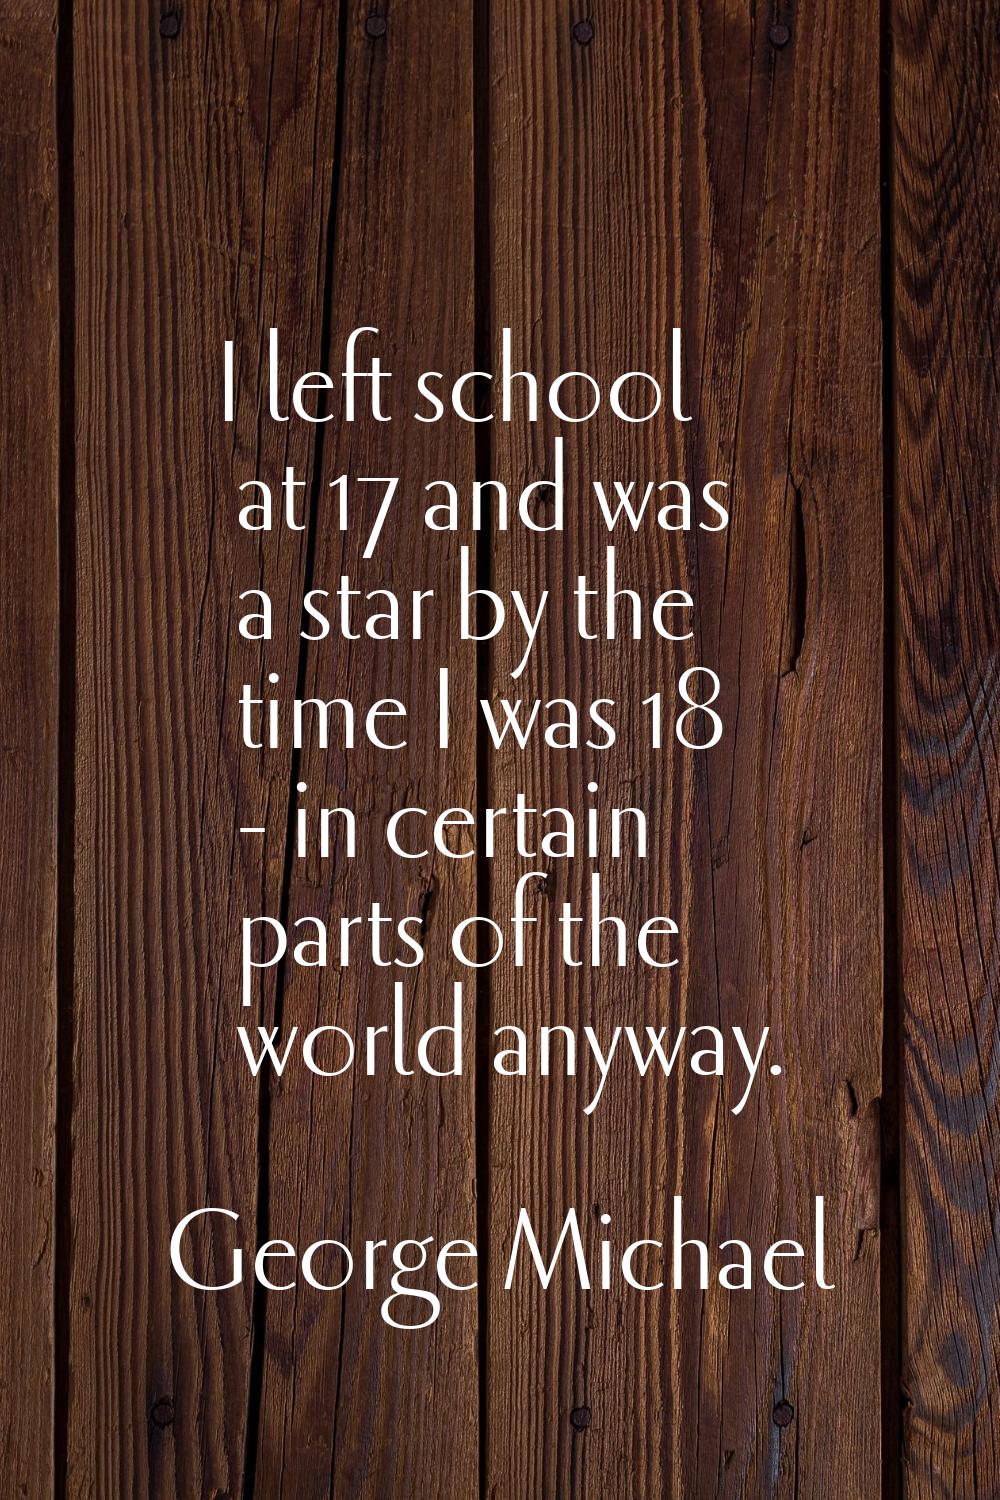 I left school at 17 and was a star by the time I was 18 - in certain parts of the world anyway.